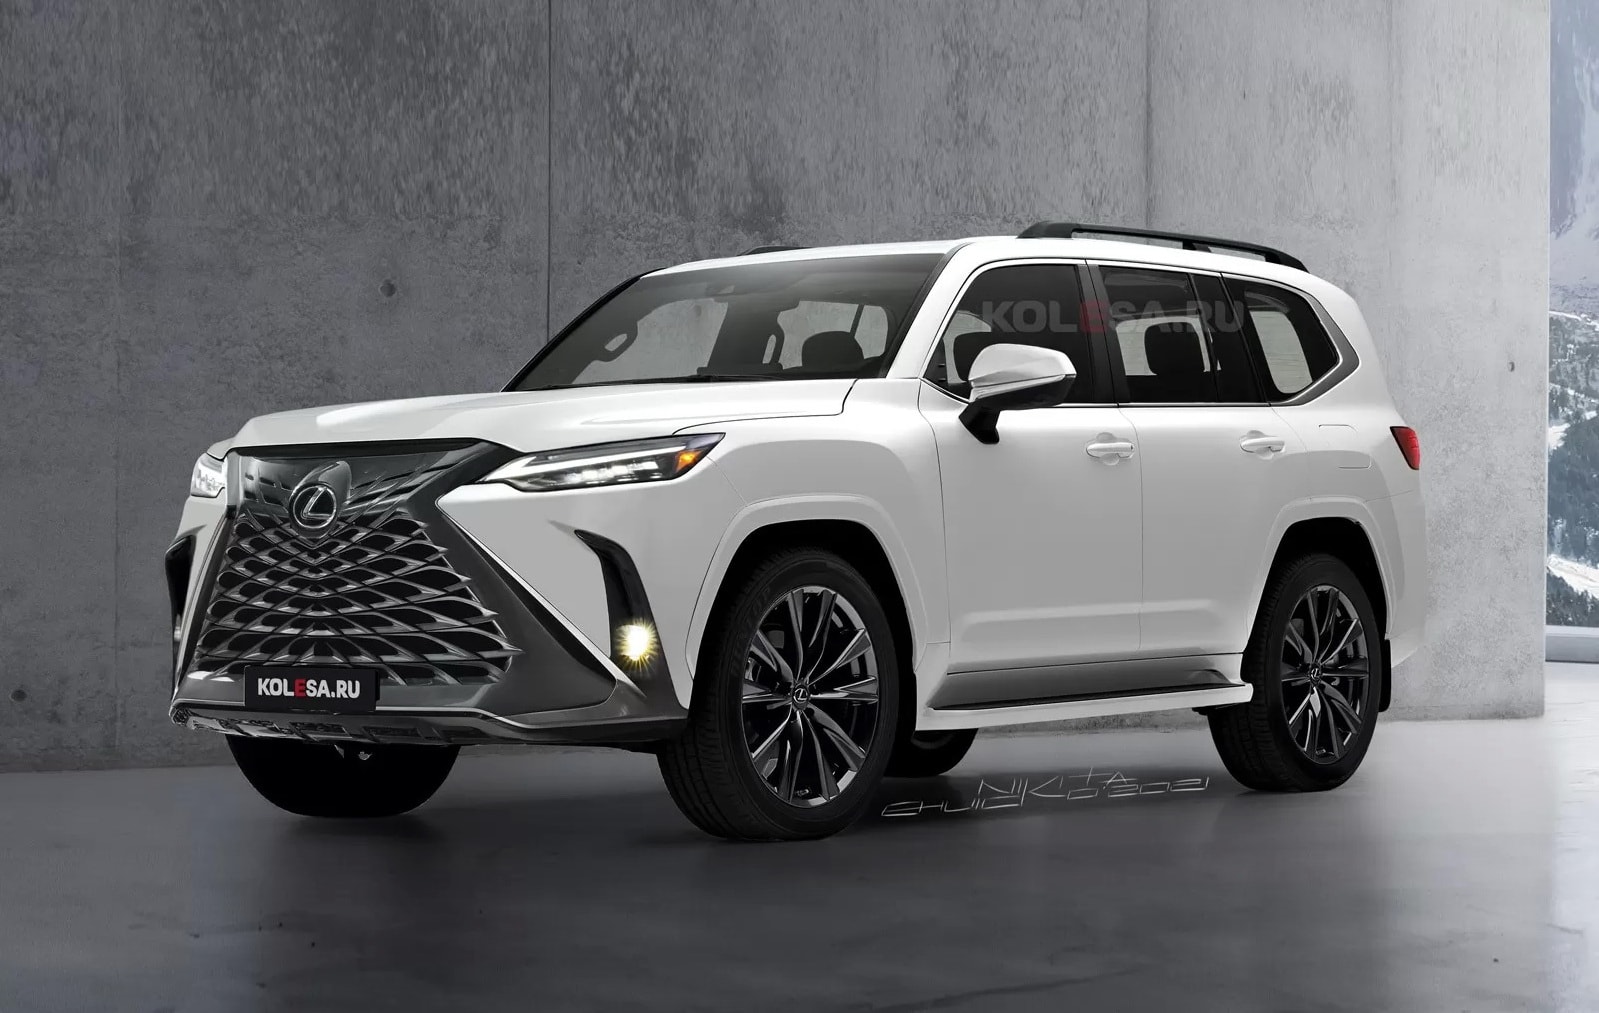 2022 Lexus LX Imagined Digitally With Hardcore Spindle Grille, Sharper